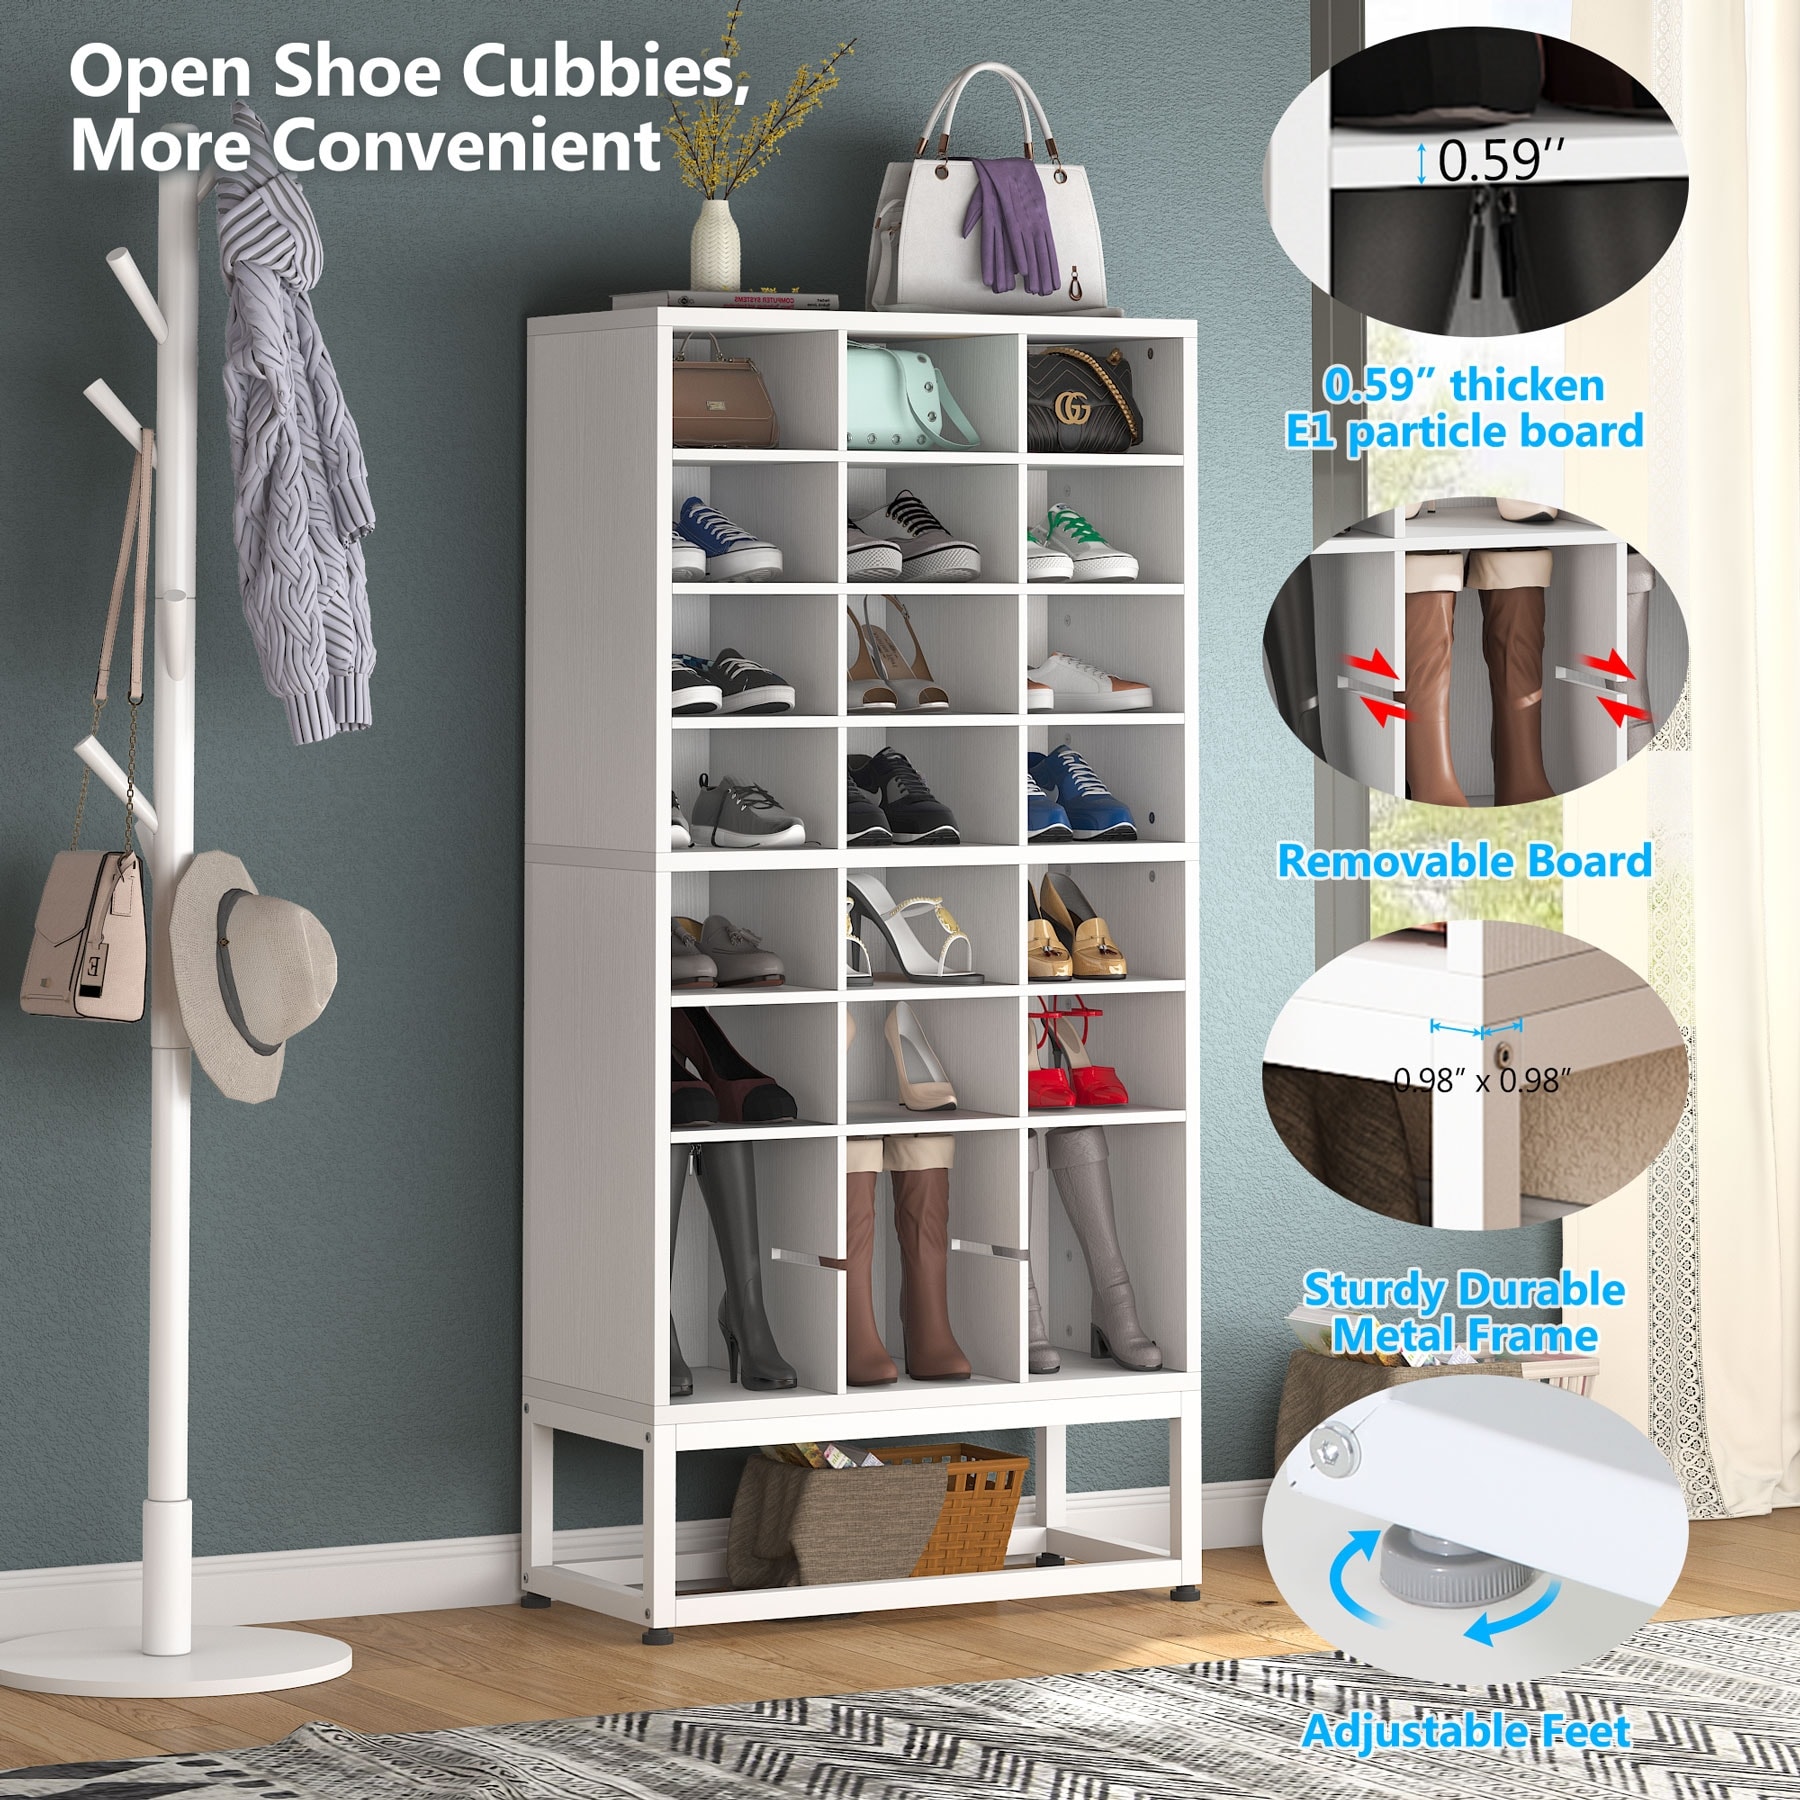 https://ak1.ostkcdn.com/images/products/is/images/direct/76128cc52d165d024ad01393b8edf774e449ffcb/White-24-Pair-Shoe-Storage-Cabinet%2C-8-Tier-Feestanding-Cube-Shoe-Rack-Closet-Organizers-for-Bedroom%2C-Hallway.jpg